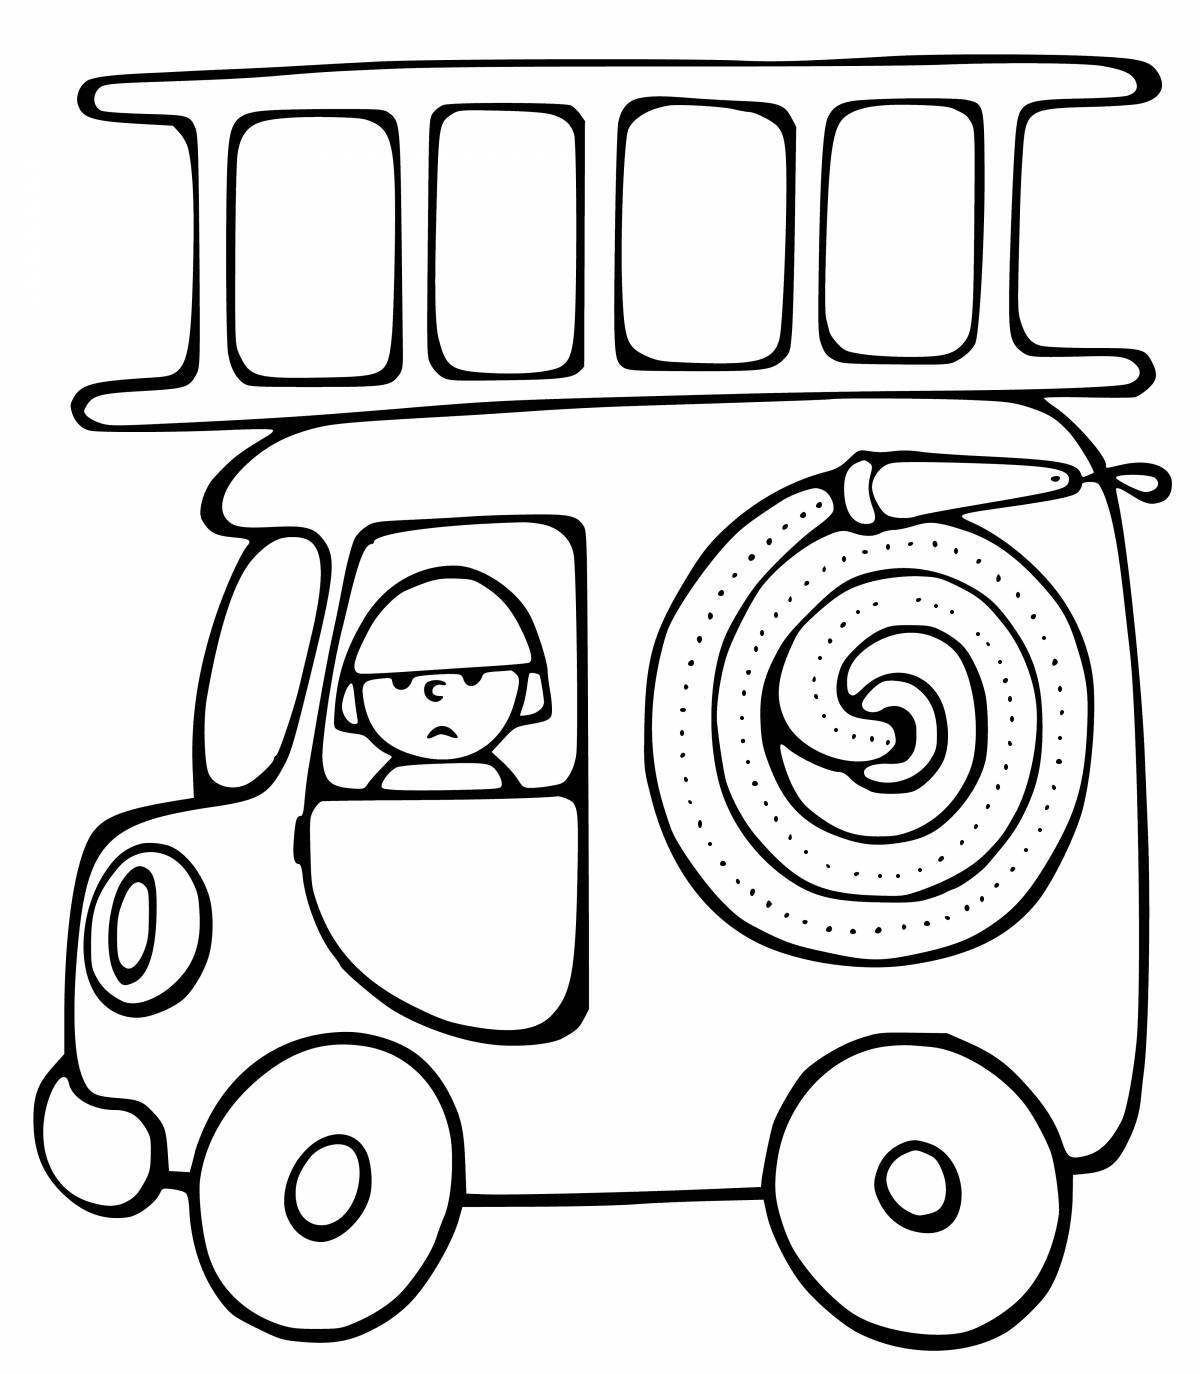 Adorable fire truck coloring book for kids